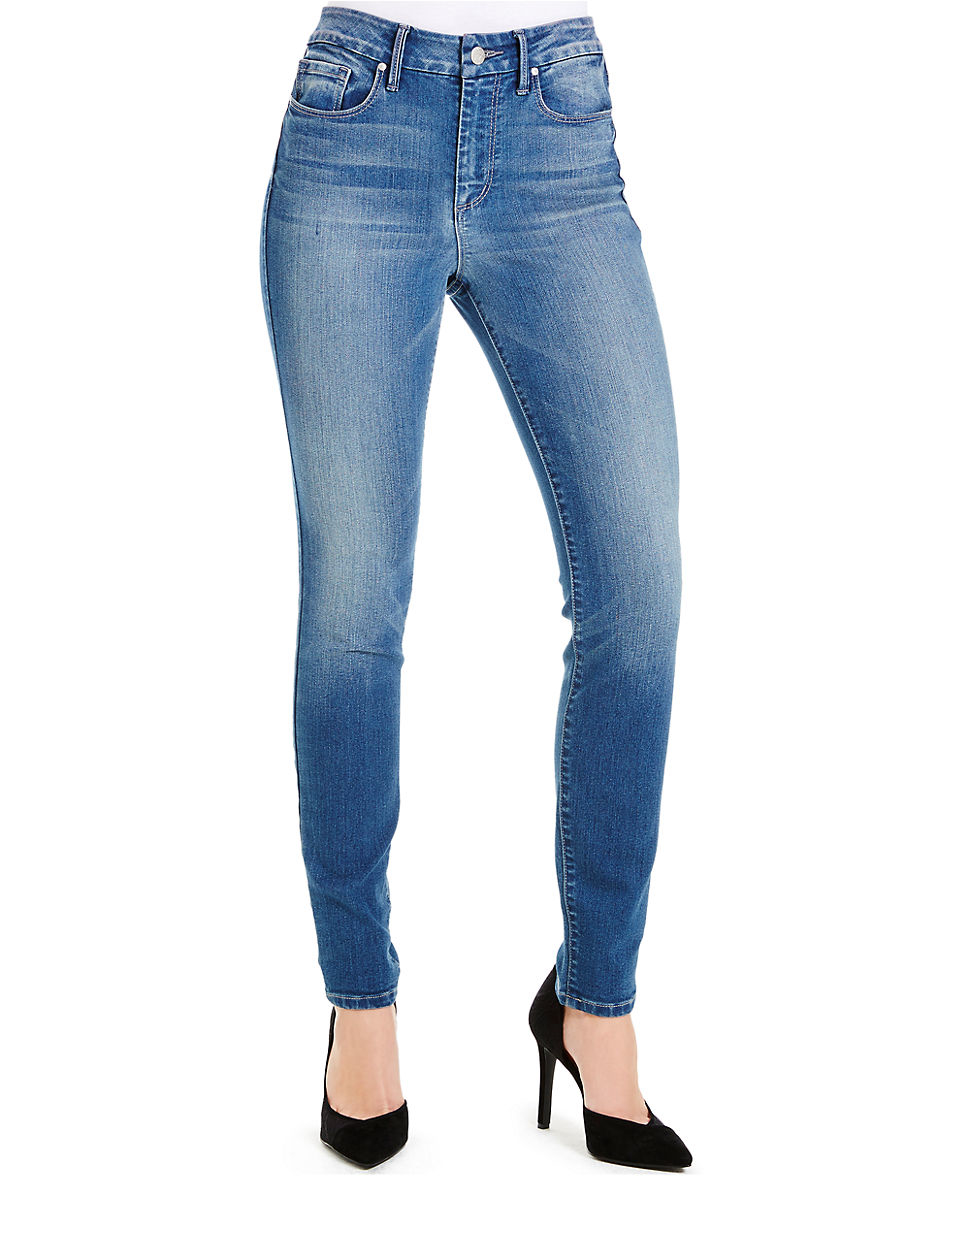 Jessica simpson High-waisted Skinny Jeans in Blue (Nightshade) | Lyst